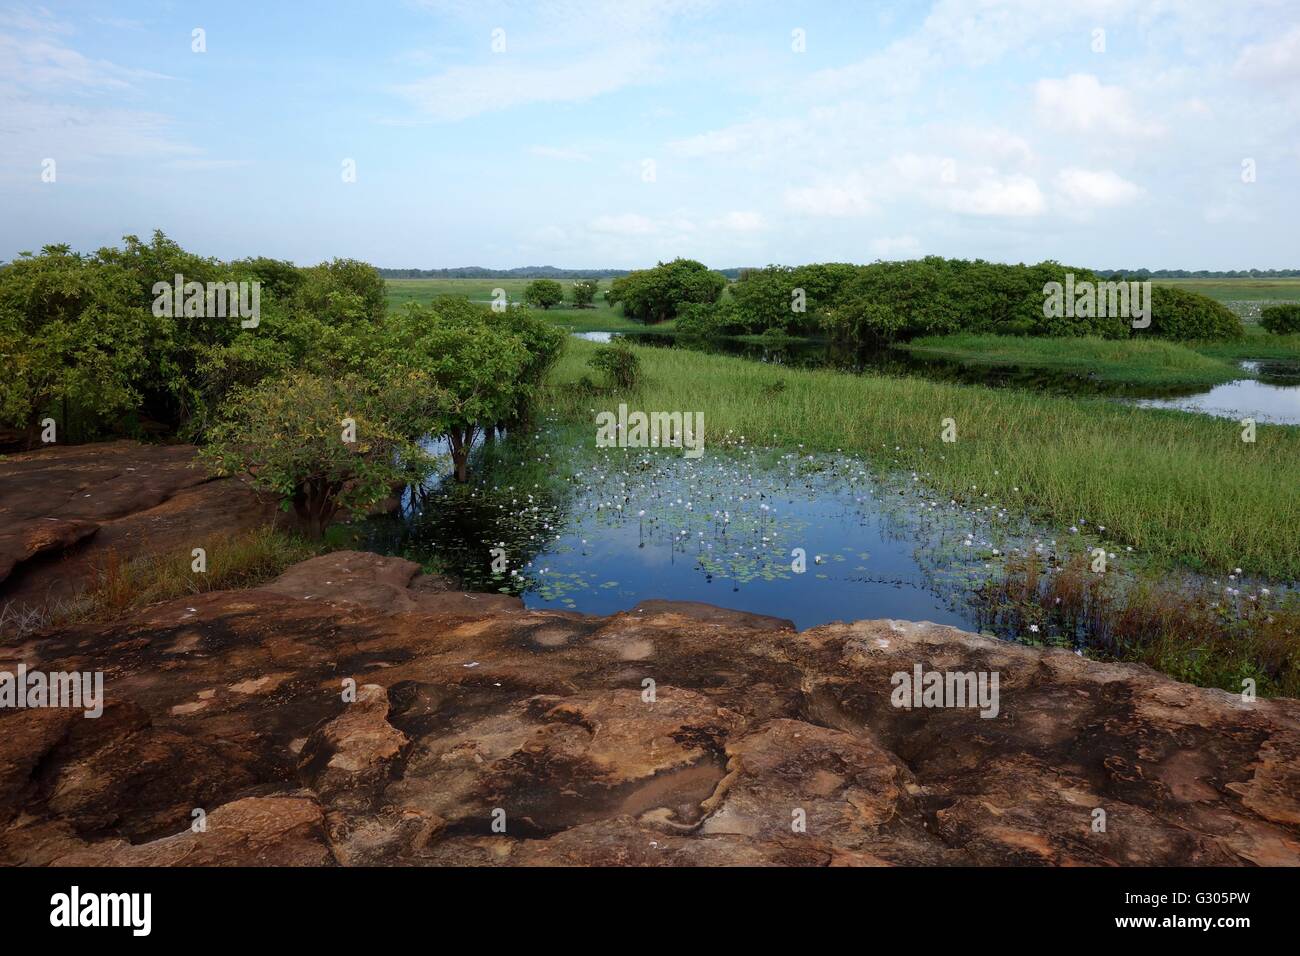 View of the floodplains and wetlands near East Alligator River in West Arnhem Land, Northern Territory, Australia Stock Photo